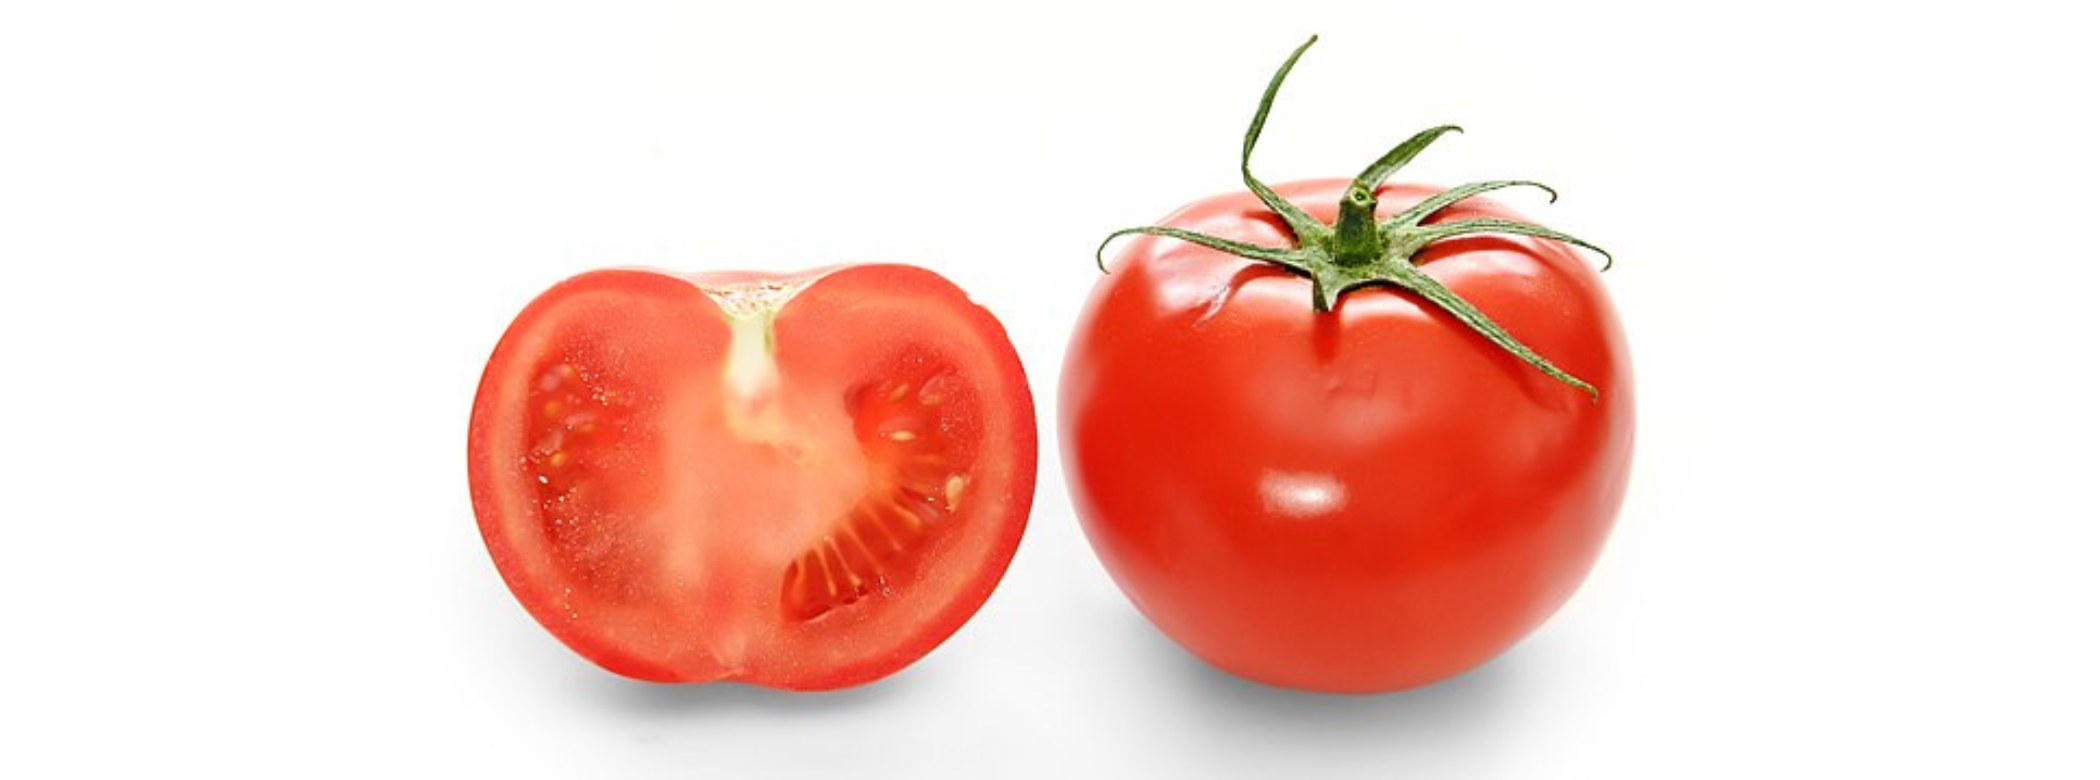 Two red tomatoes on a white background. The tomato on the left is cut open, showing the inside. The tomato on the right is whole.